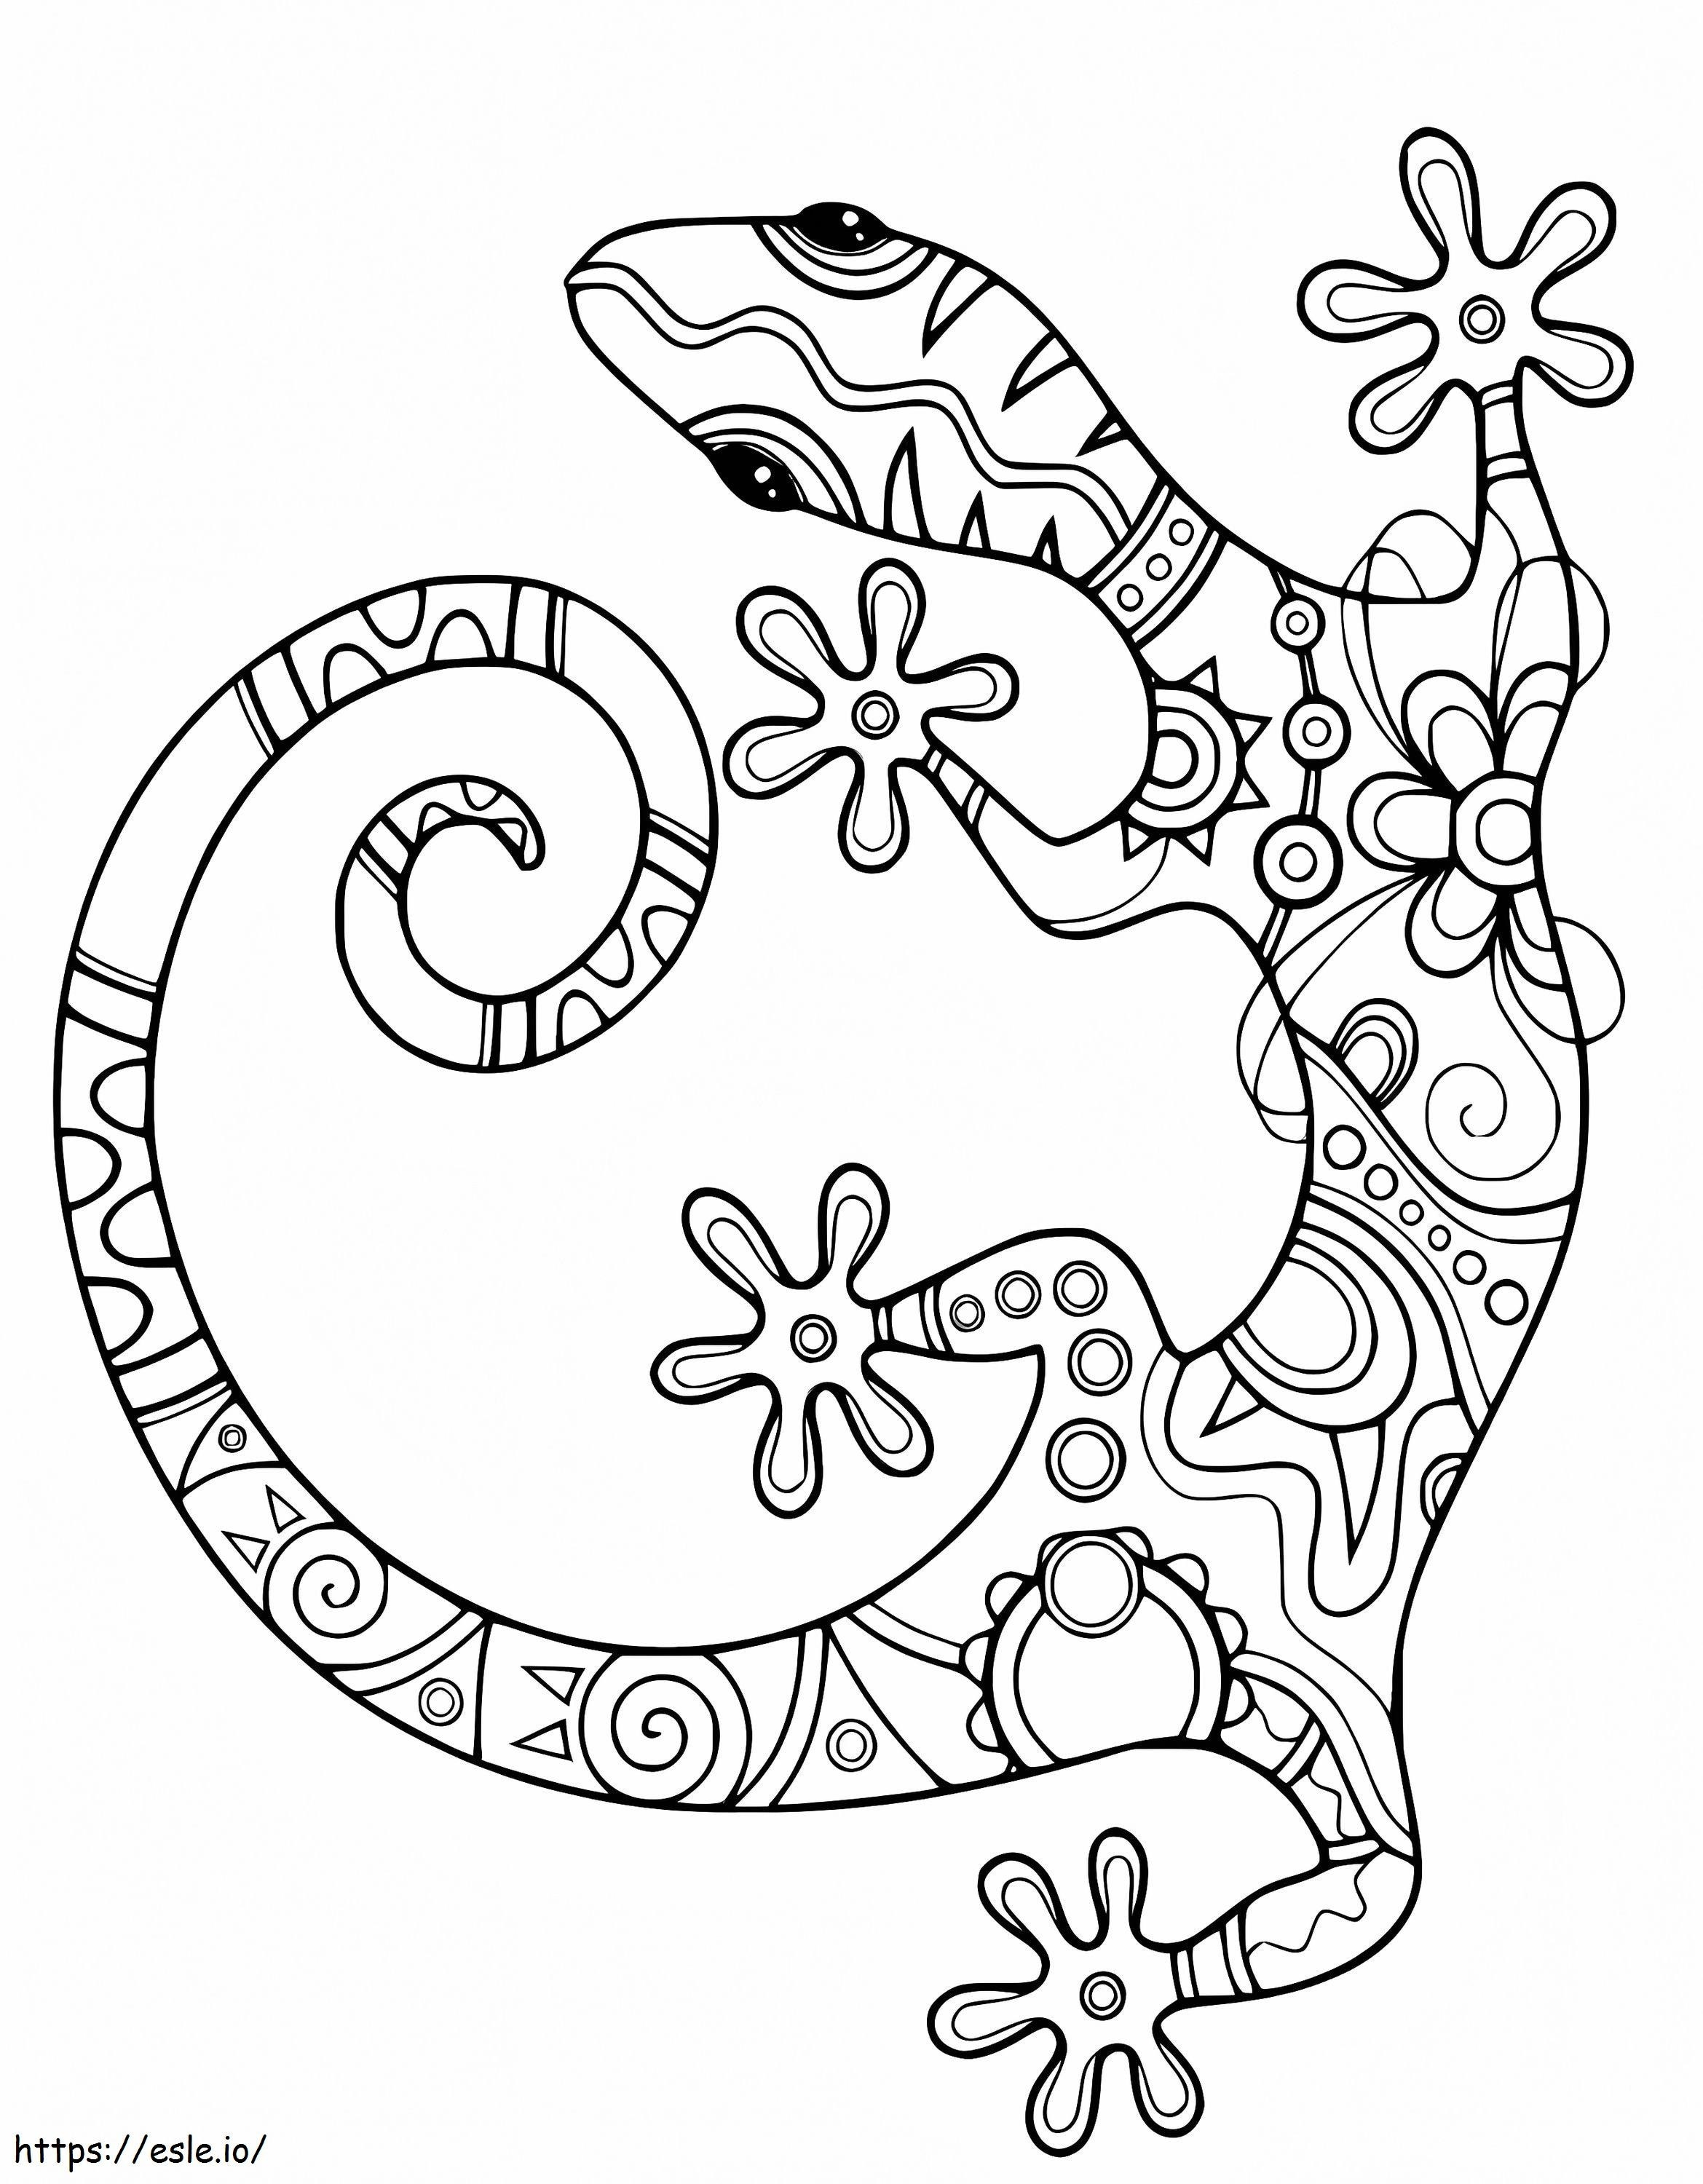 Zentangle Gecko coloring page